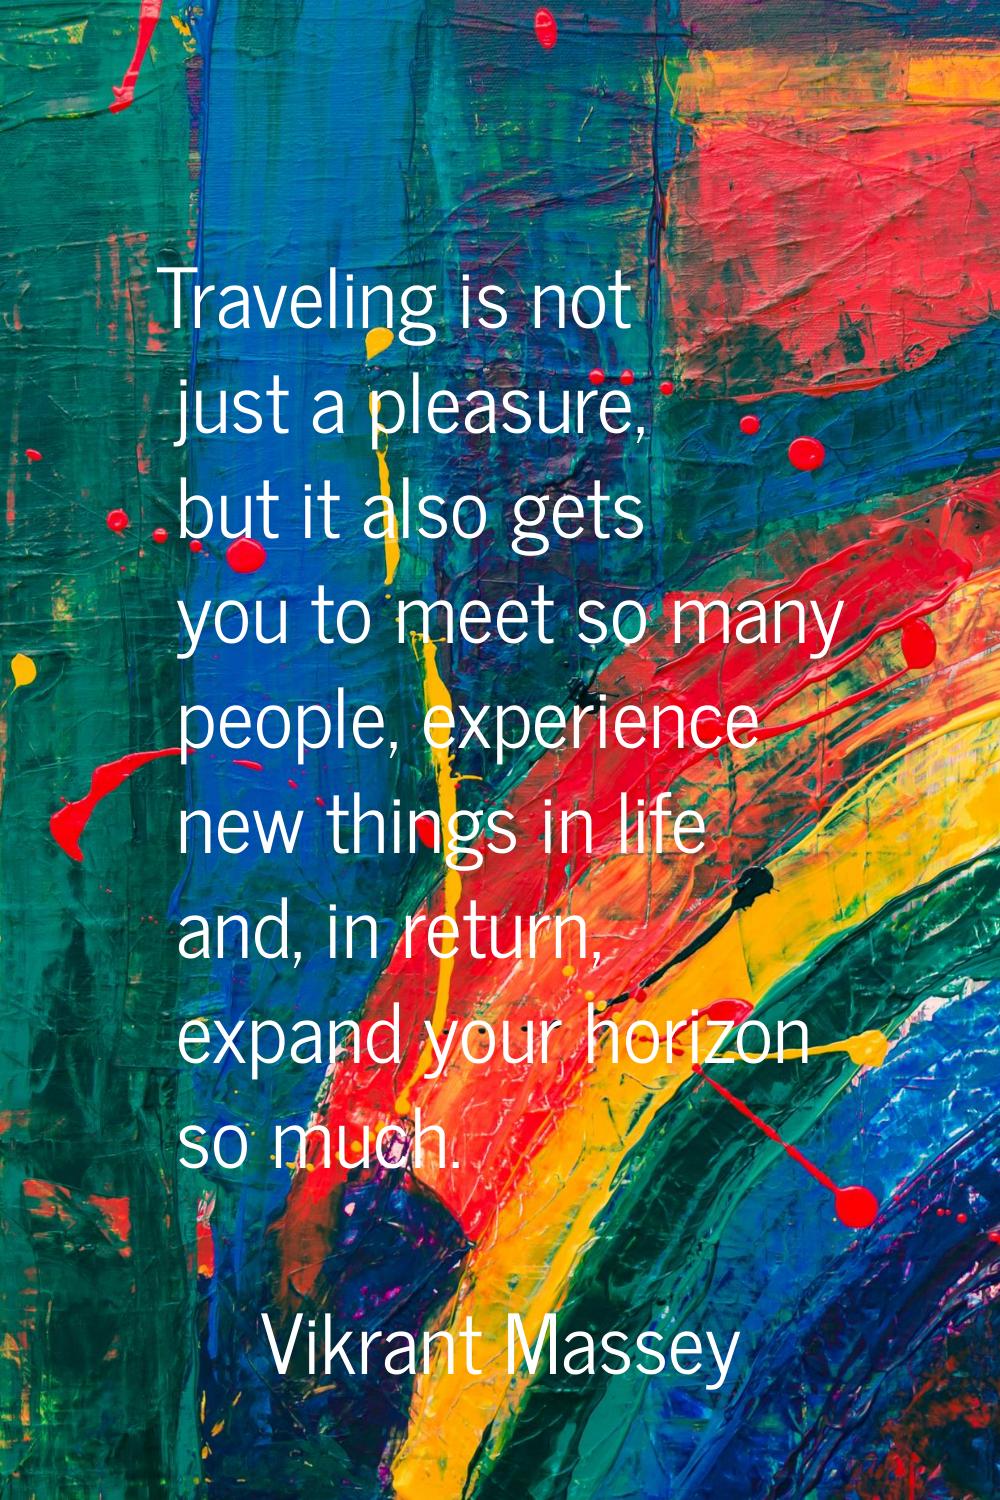 Traveling is not just a pleasure, but it also gets you to meet so many people, experience new thing